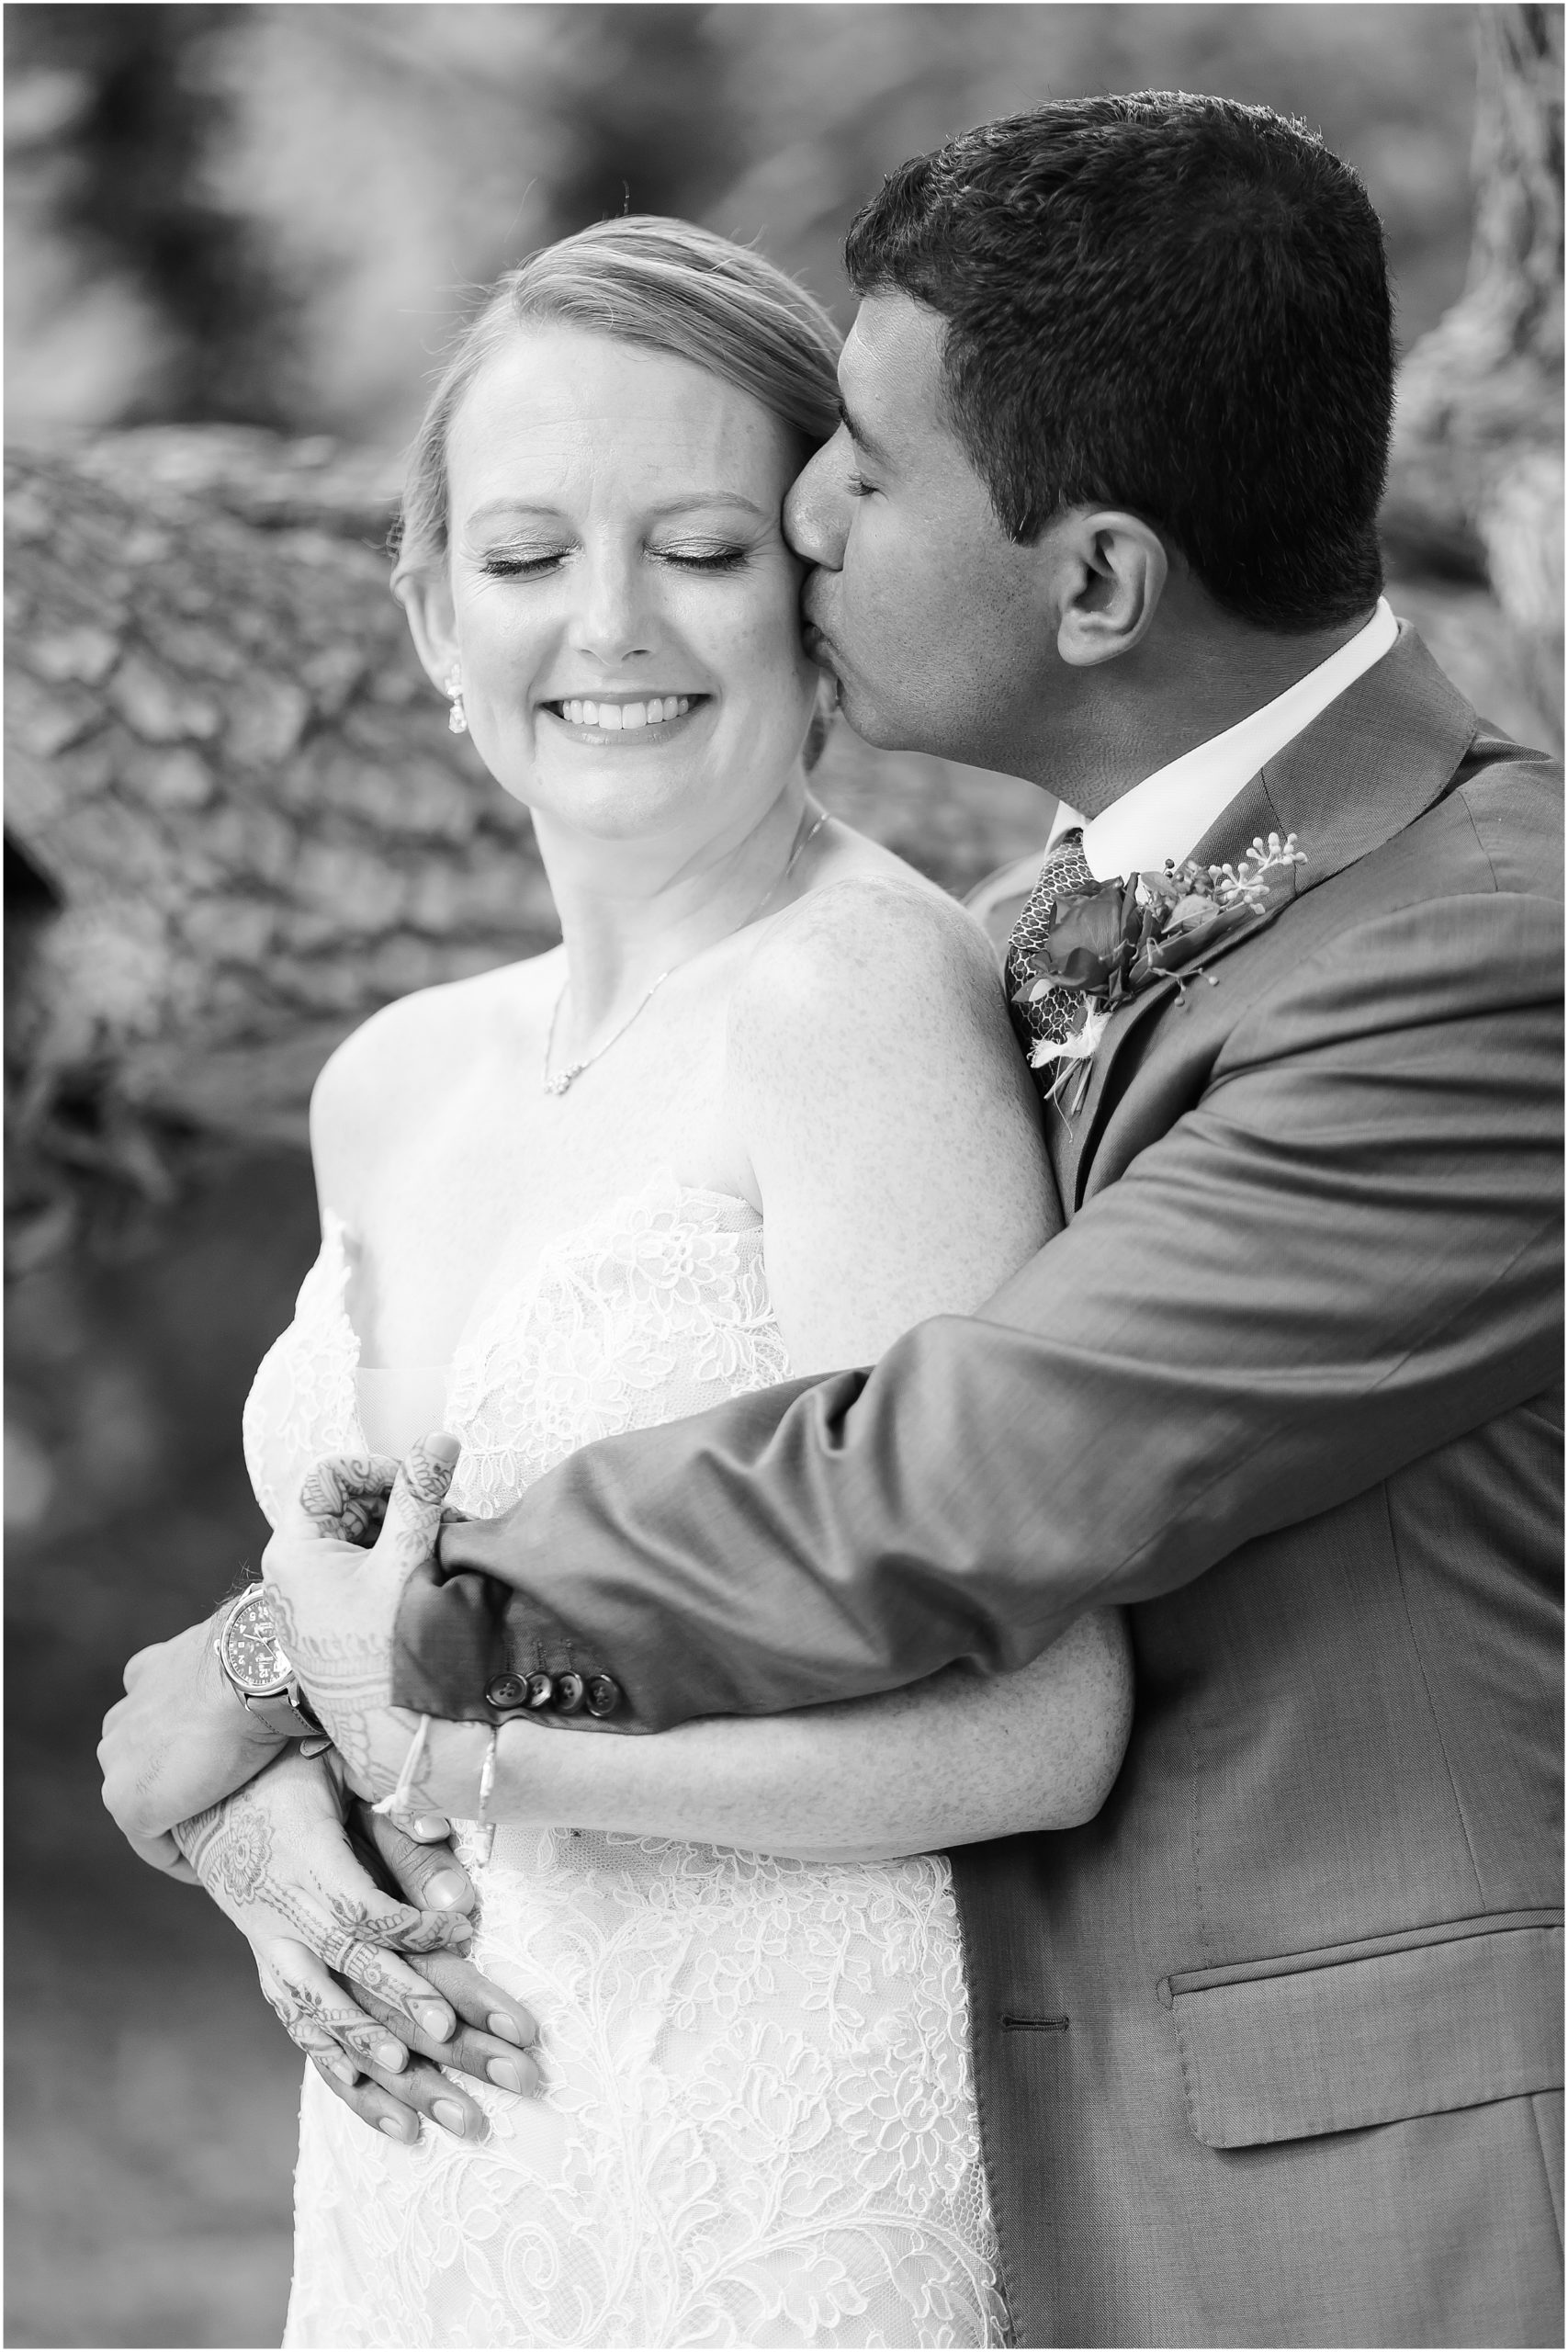 Black and white portrait of groom embracing bride on wedding day